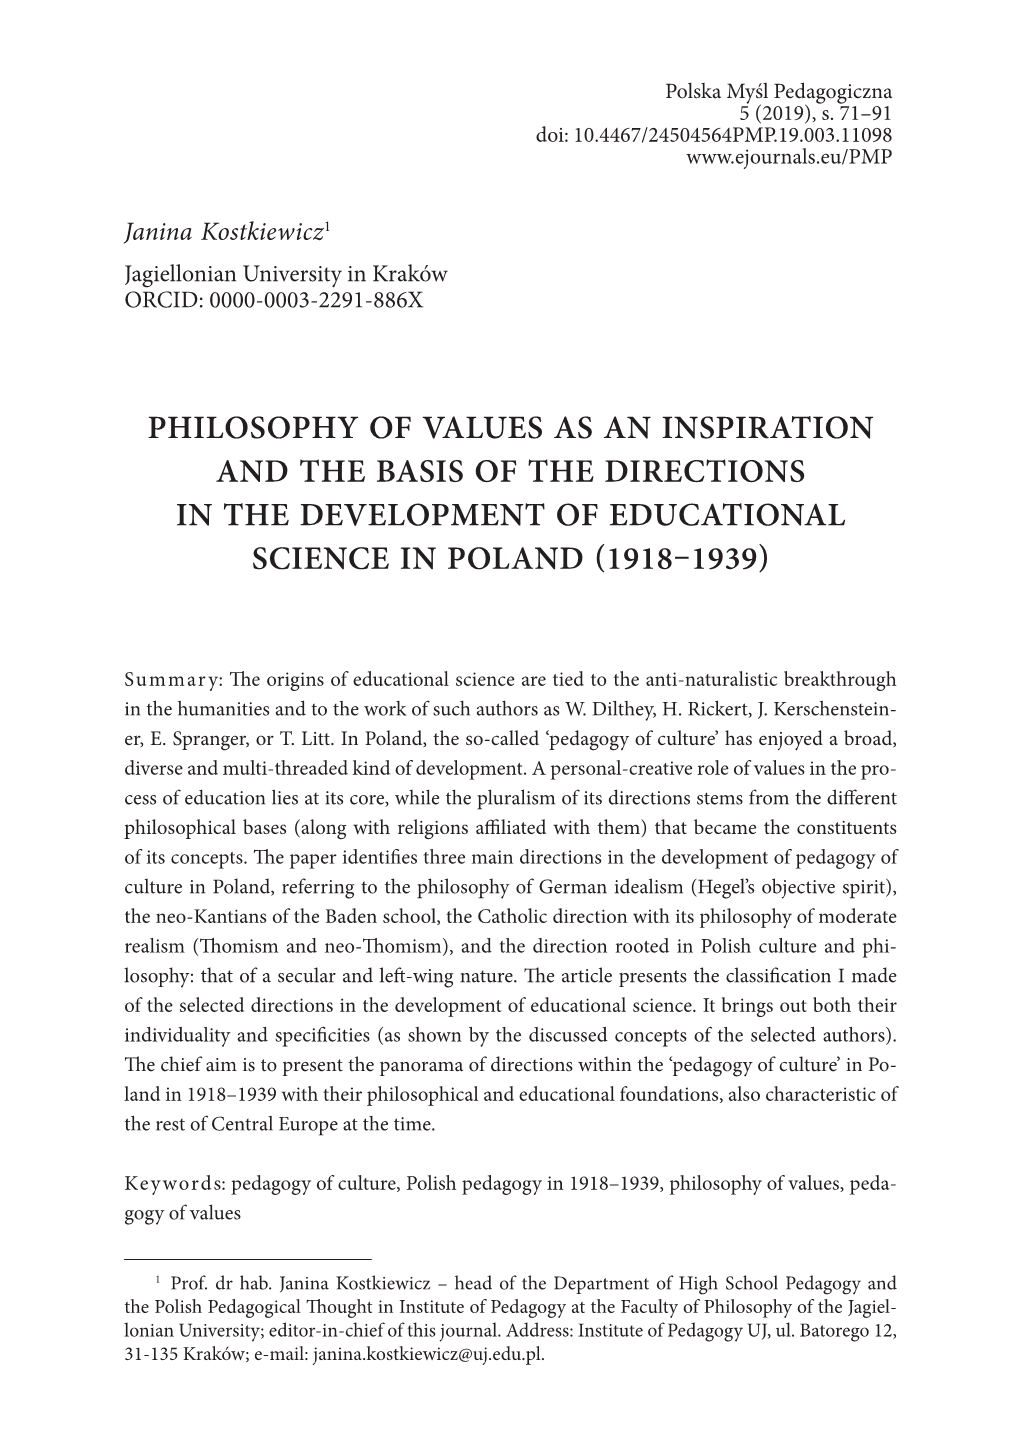 Philosophy of Values As an Inspiration and the Basis of the Directions in the Development… 71 Polska Myśl Pedagogiczna 5 (2019), S